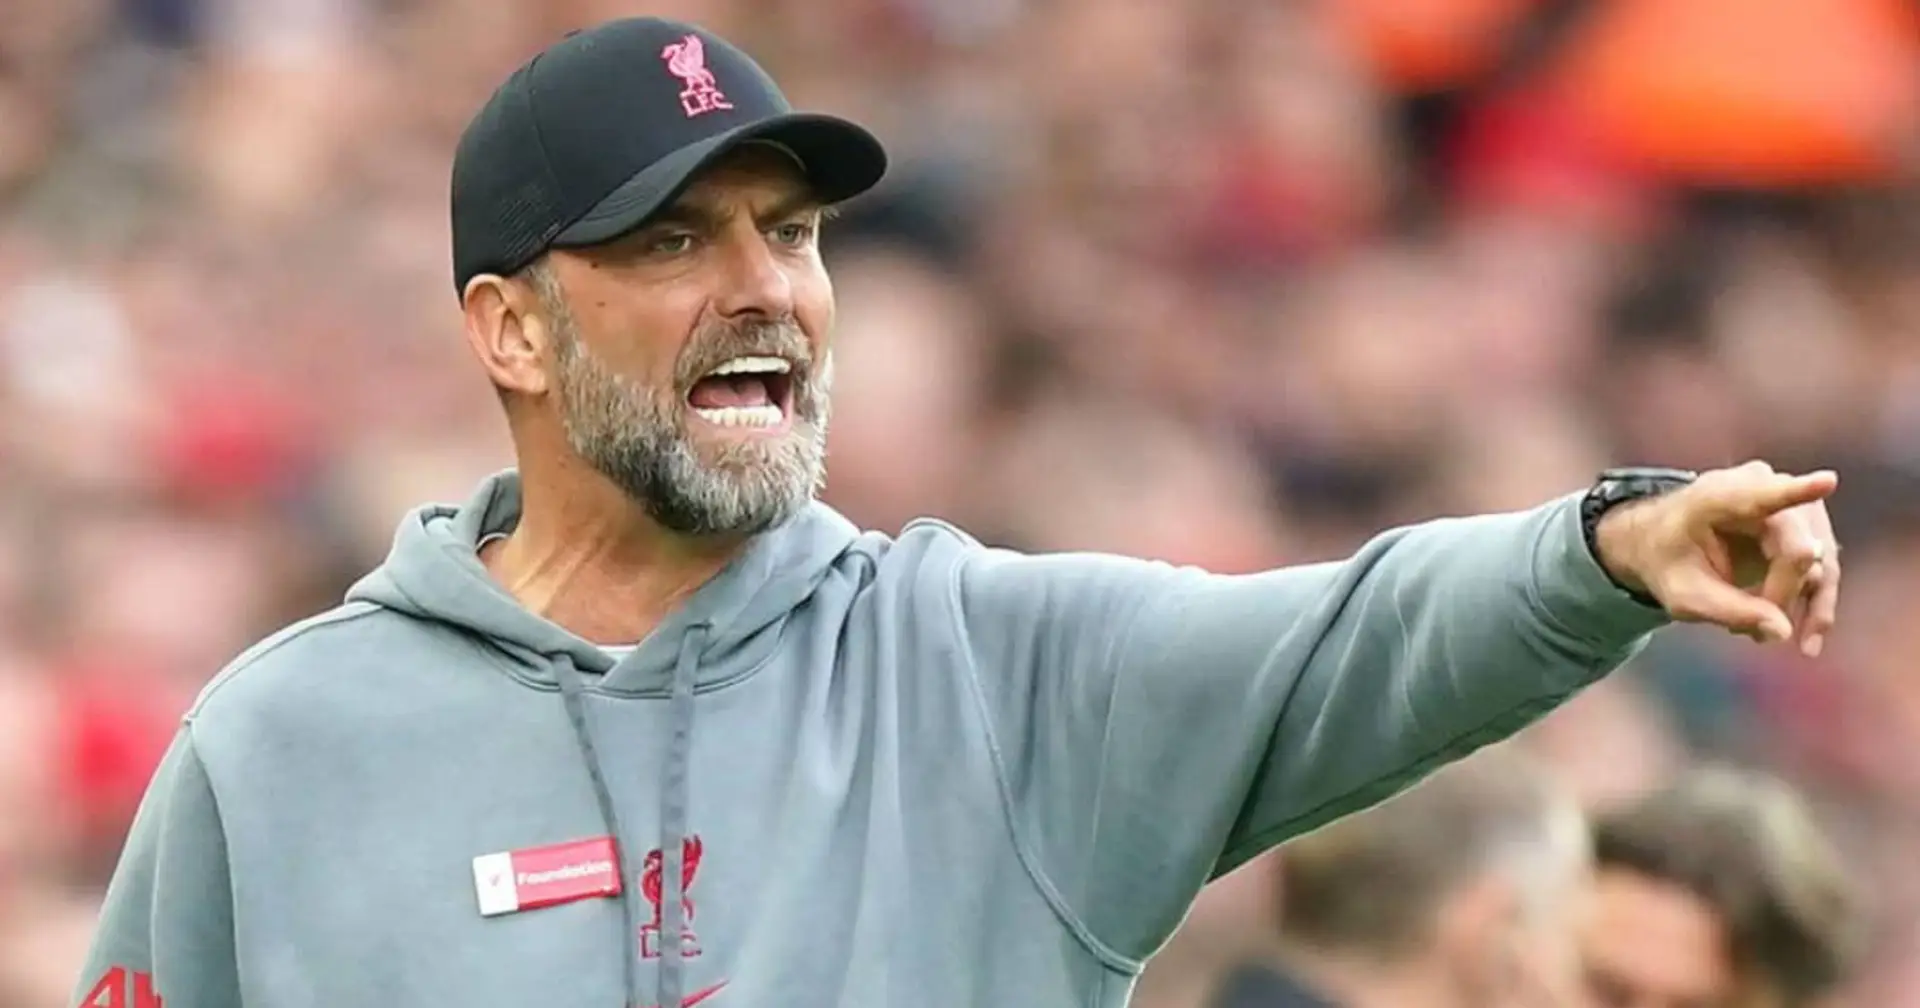 'No d***head policy': fan makes interesting claim about Liverpool recruitment in Klopp era